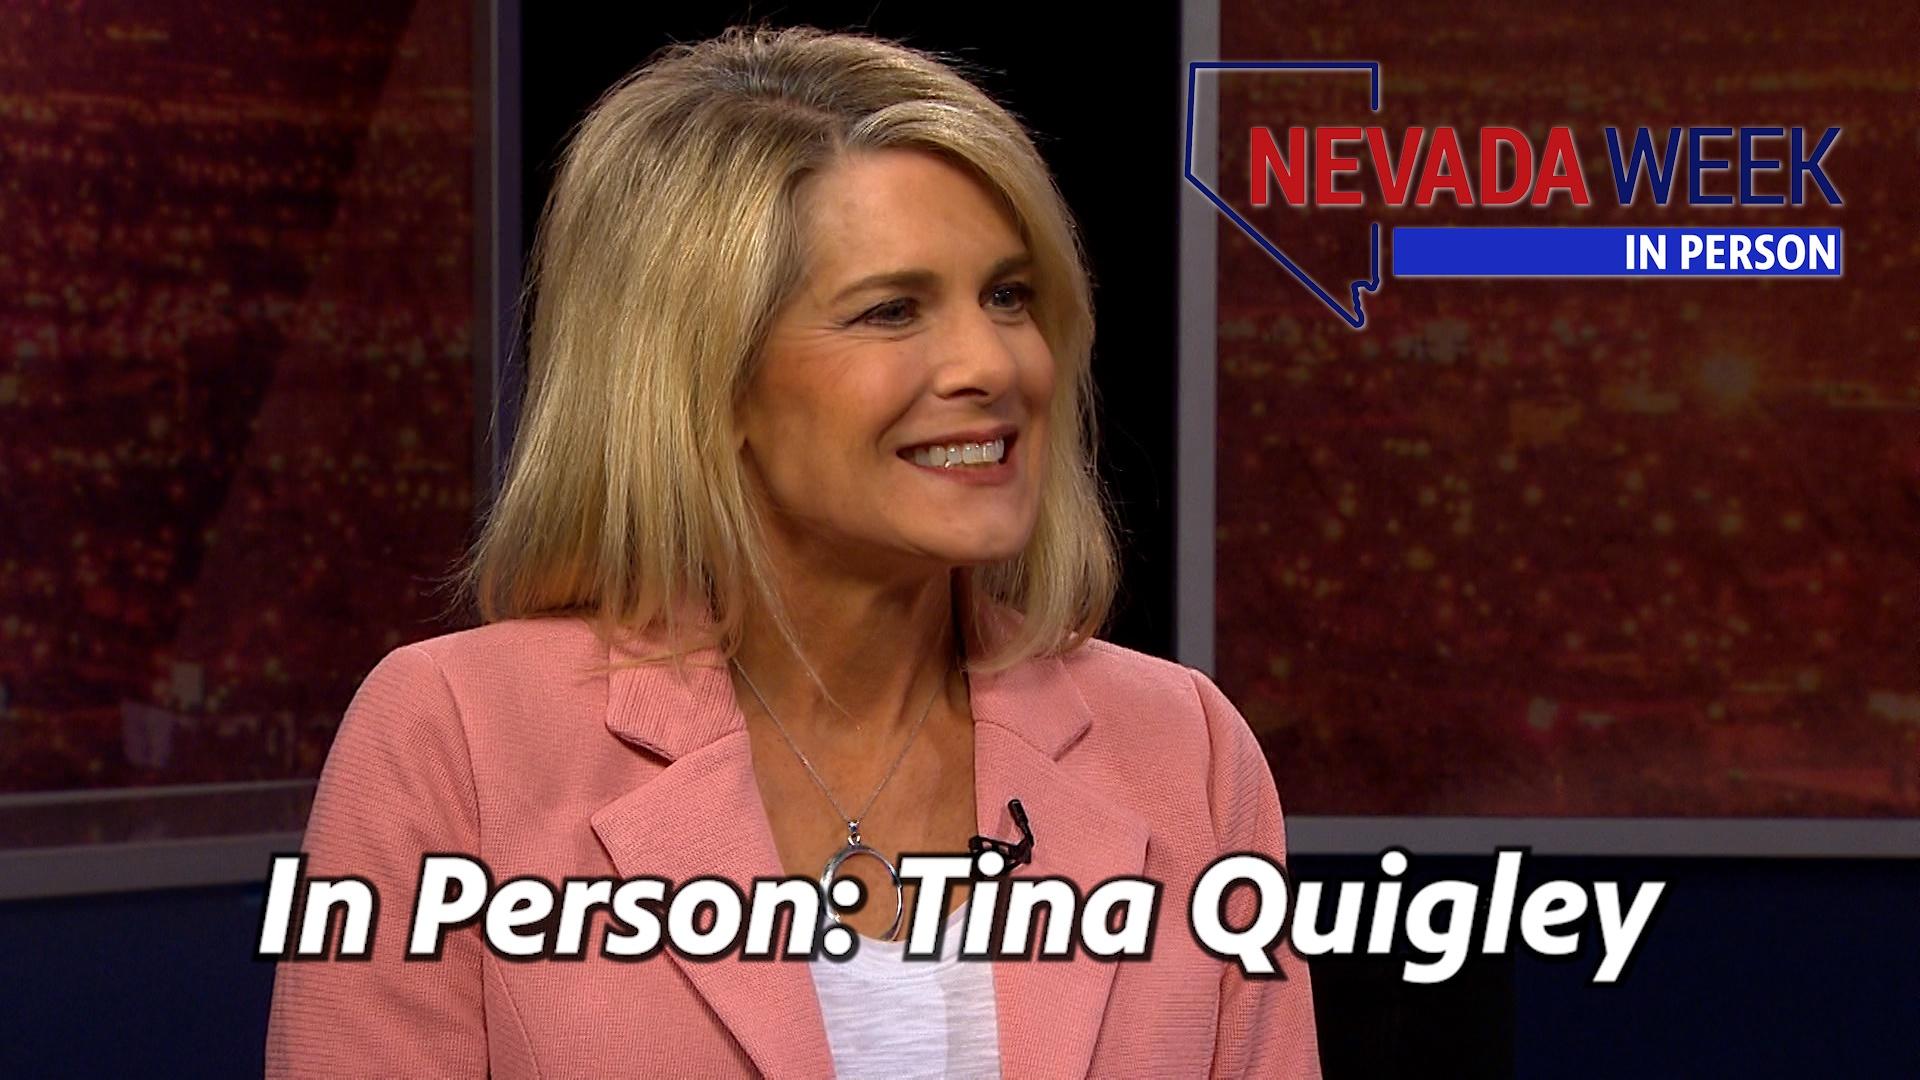 Nevada Week In Person | Tina Quigley